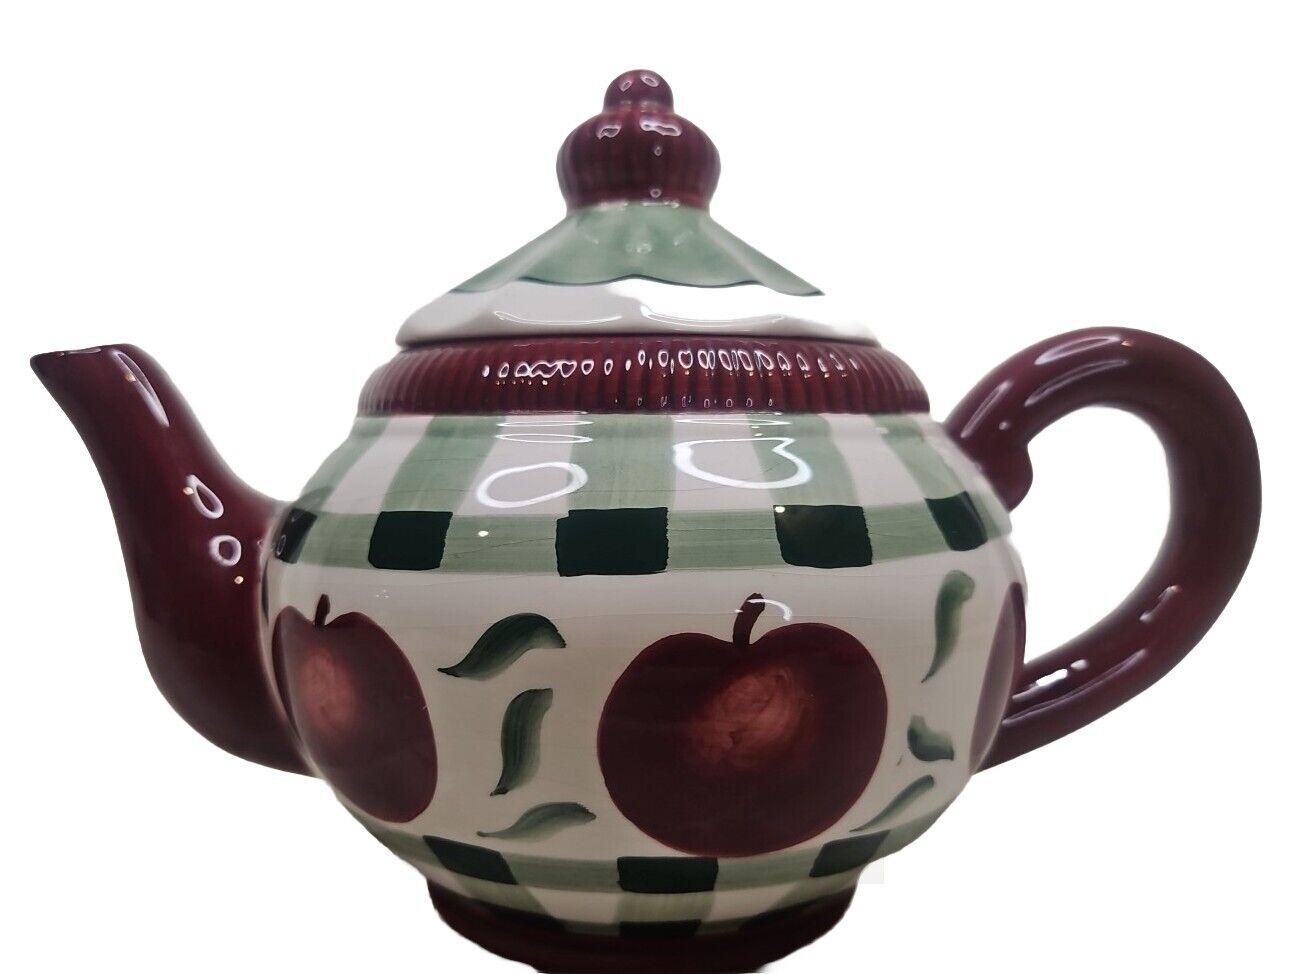 Large Ceramic Apple Tea Pot  Green, White, Plaid Young\'s Exclusive  1999 